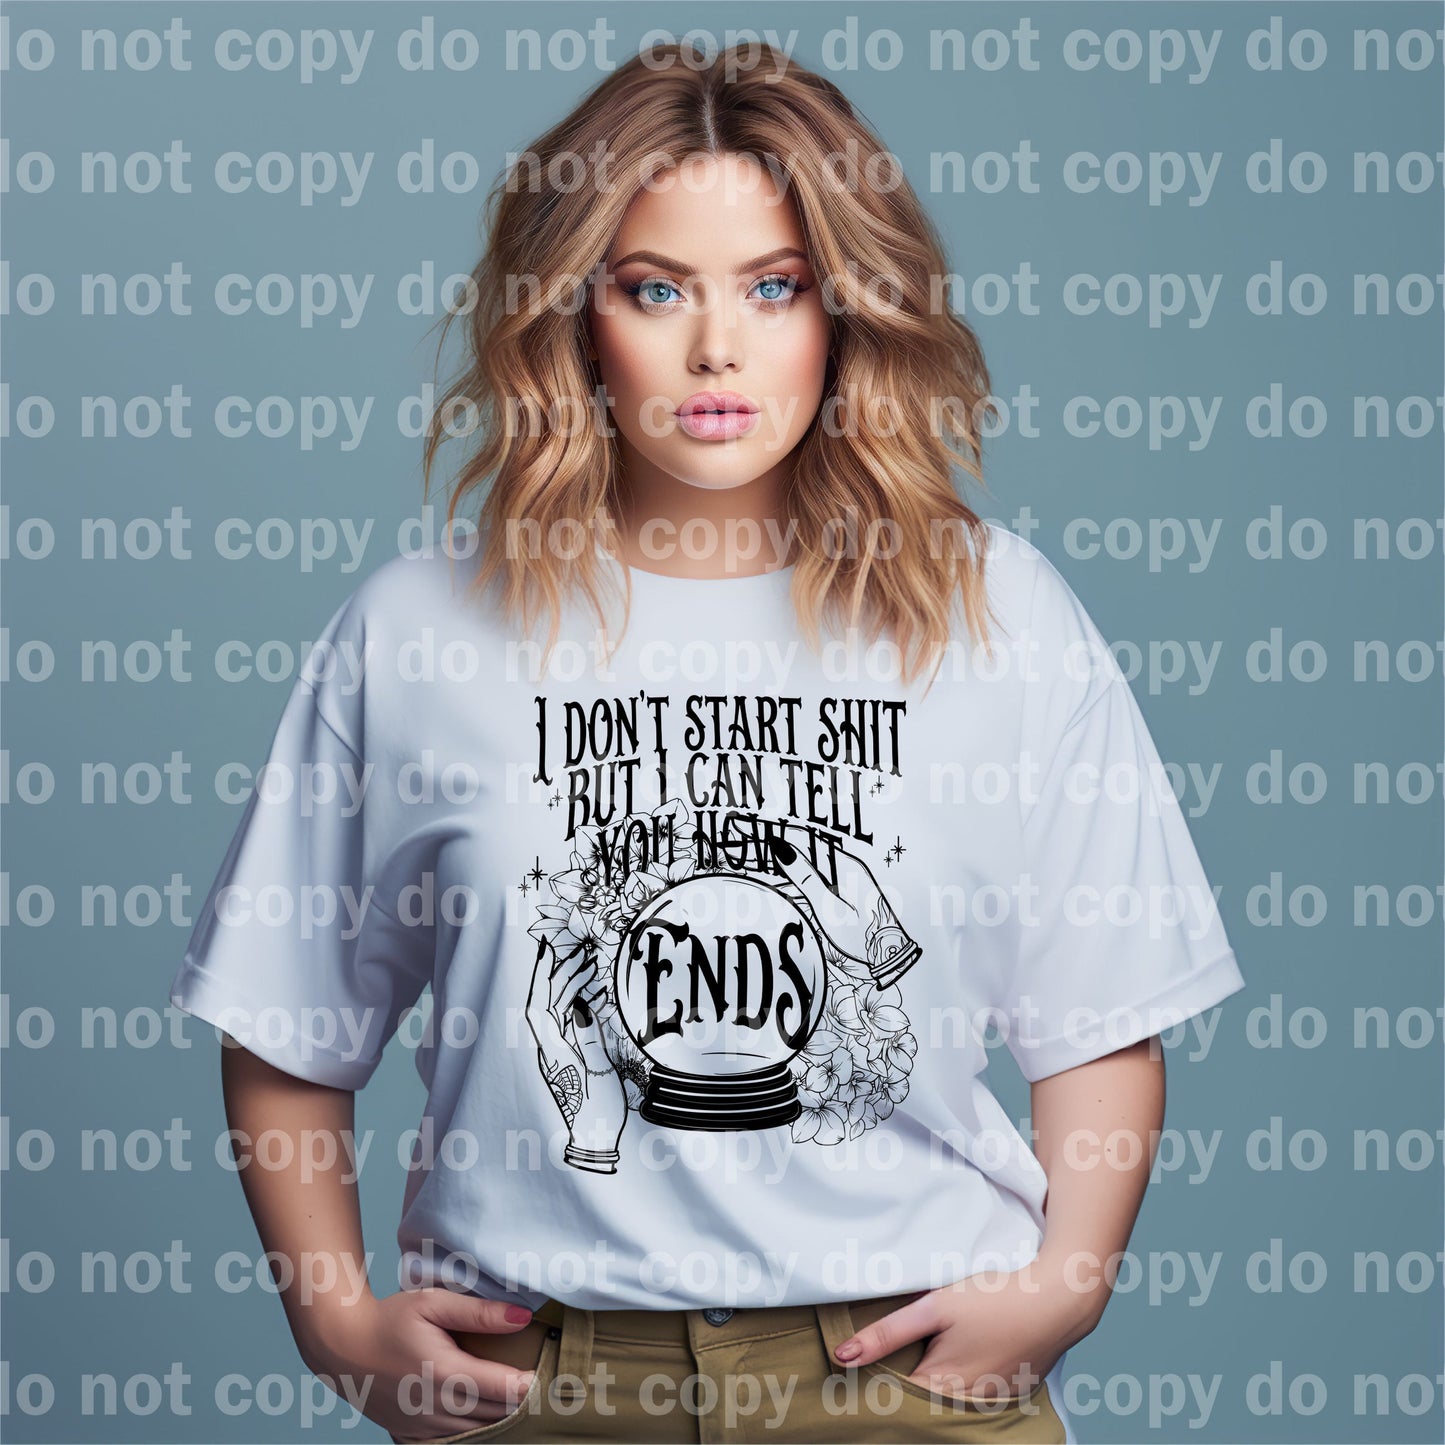 I Don't Start Shit But I Can Tell You How It Ends Full Color/Black/White Dream Print or Sublimation Print